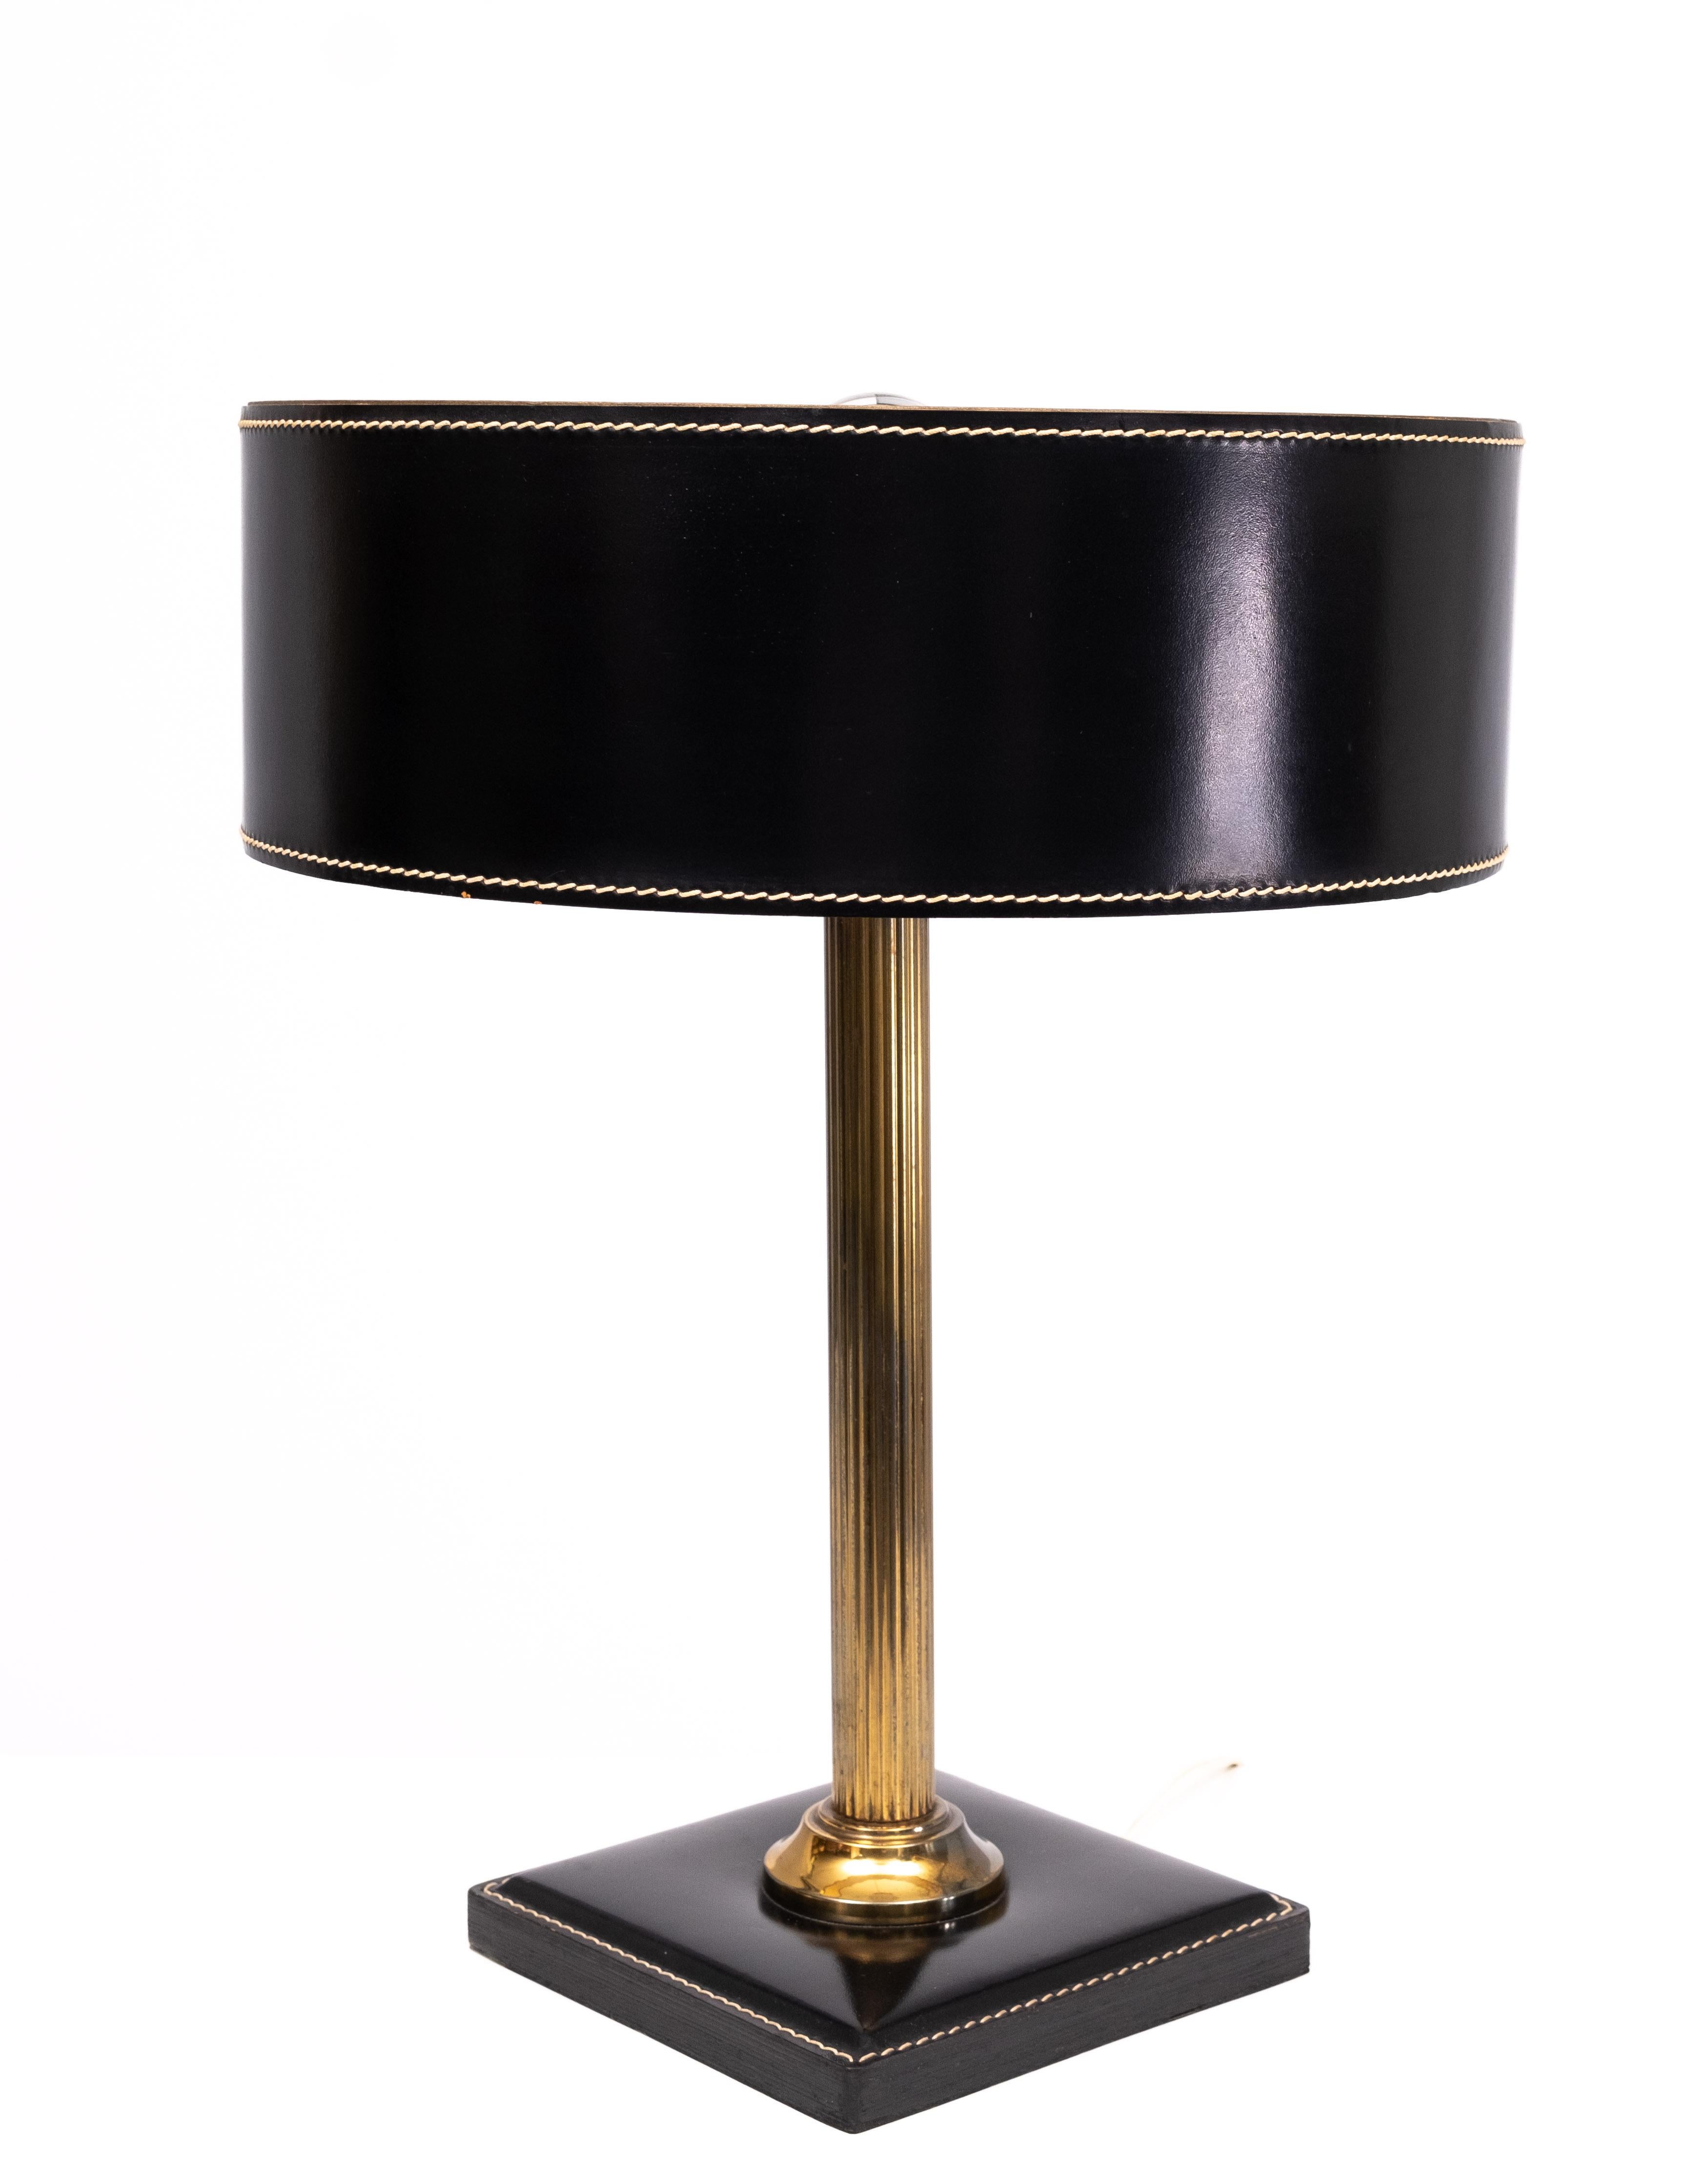 Leather Jacques Adnet clad table lamp in Black leather, France 1960